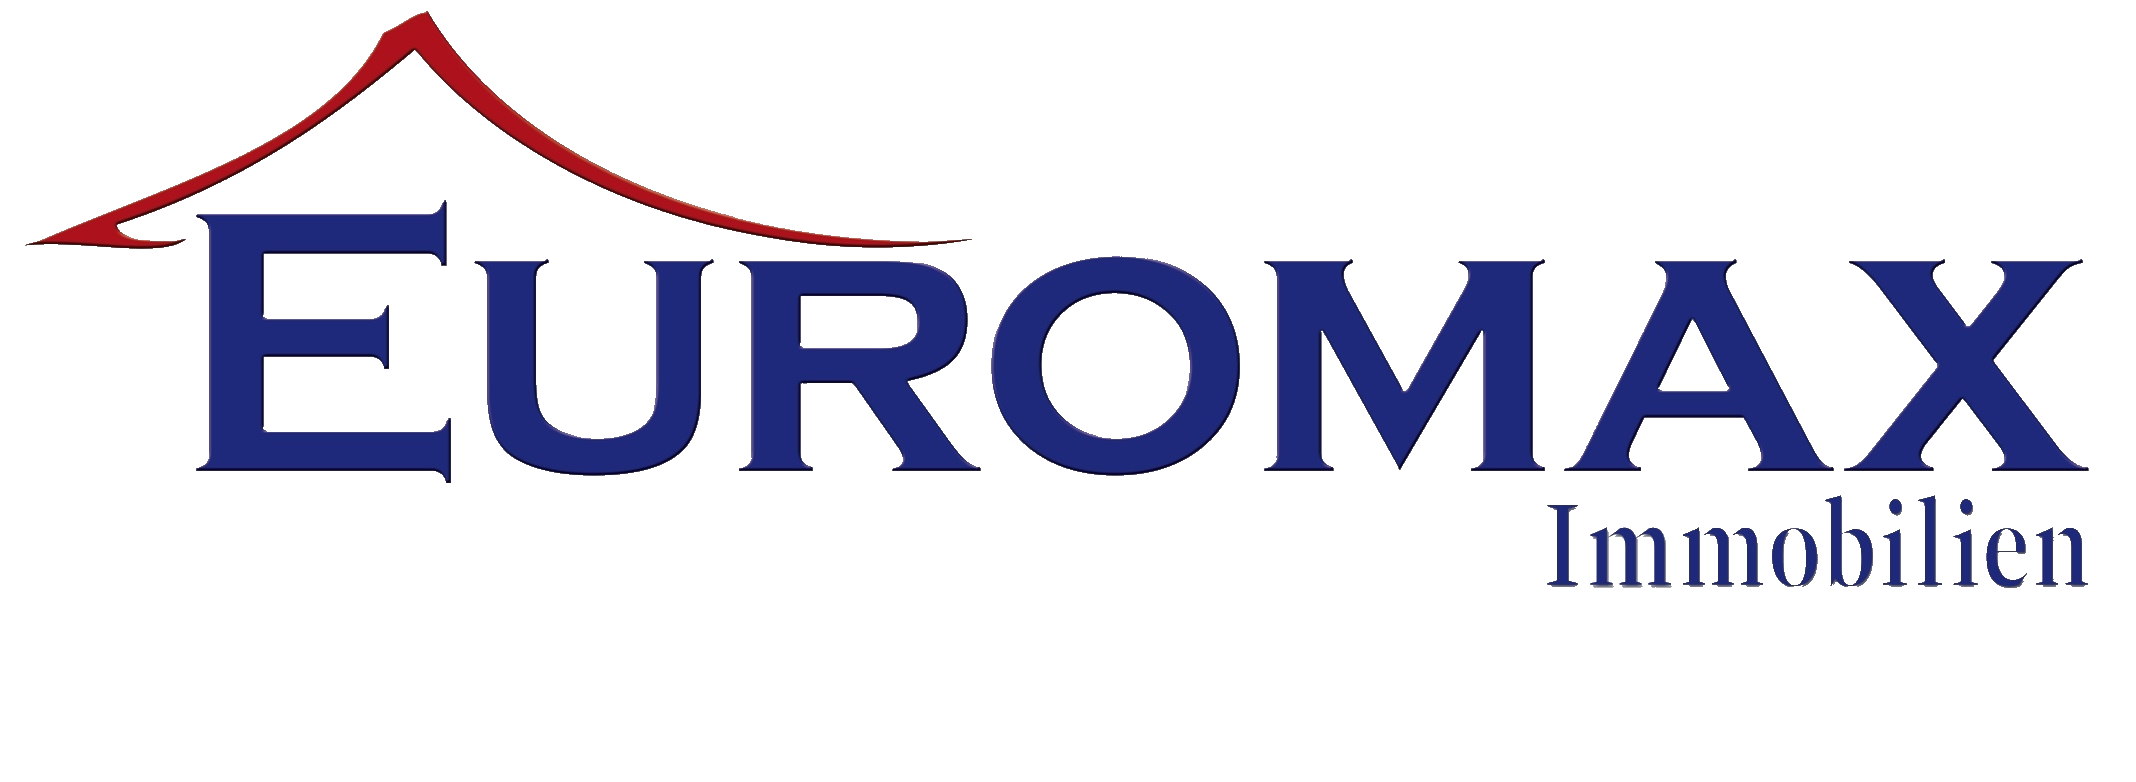 Euromax Immobilien Logo